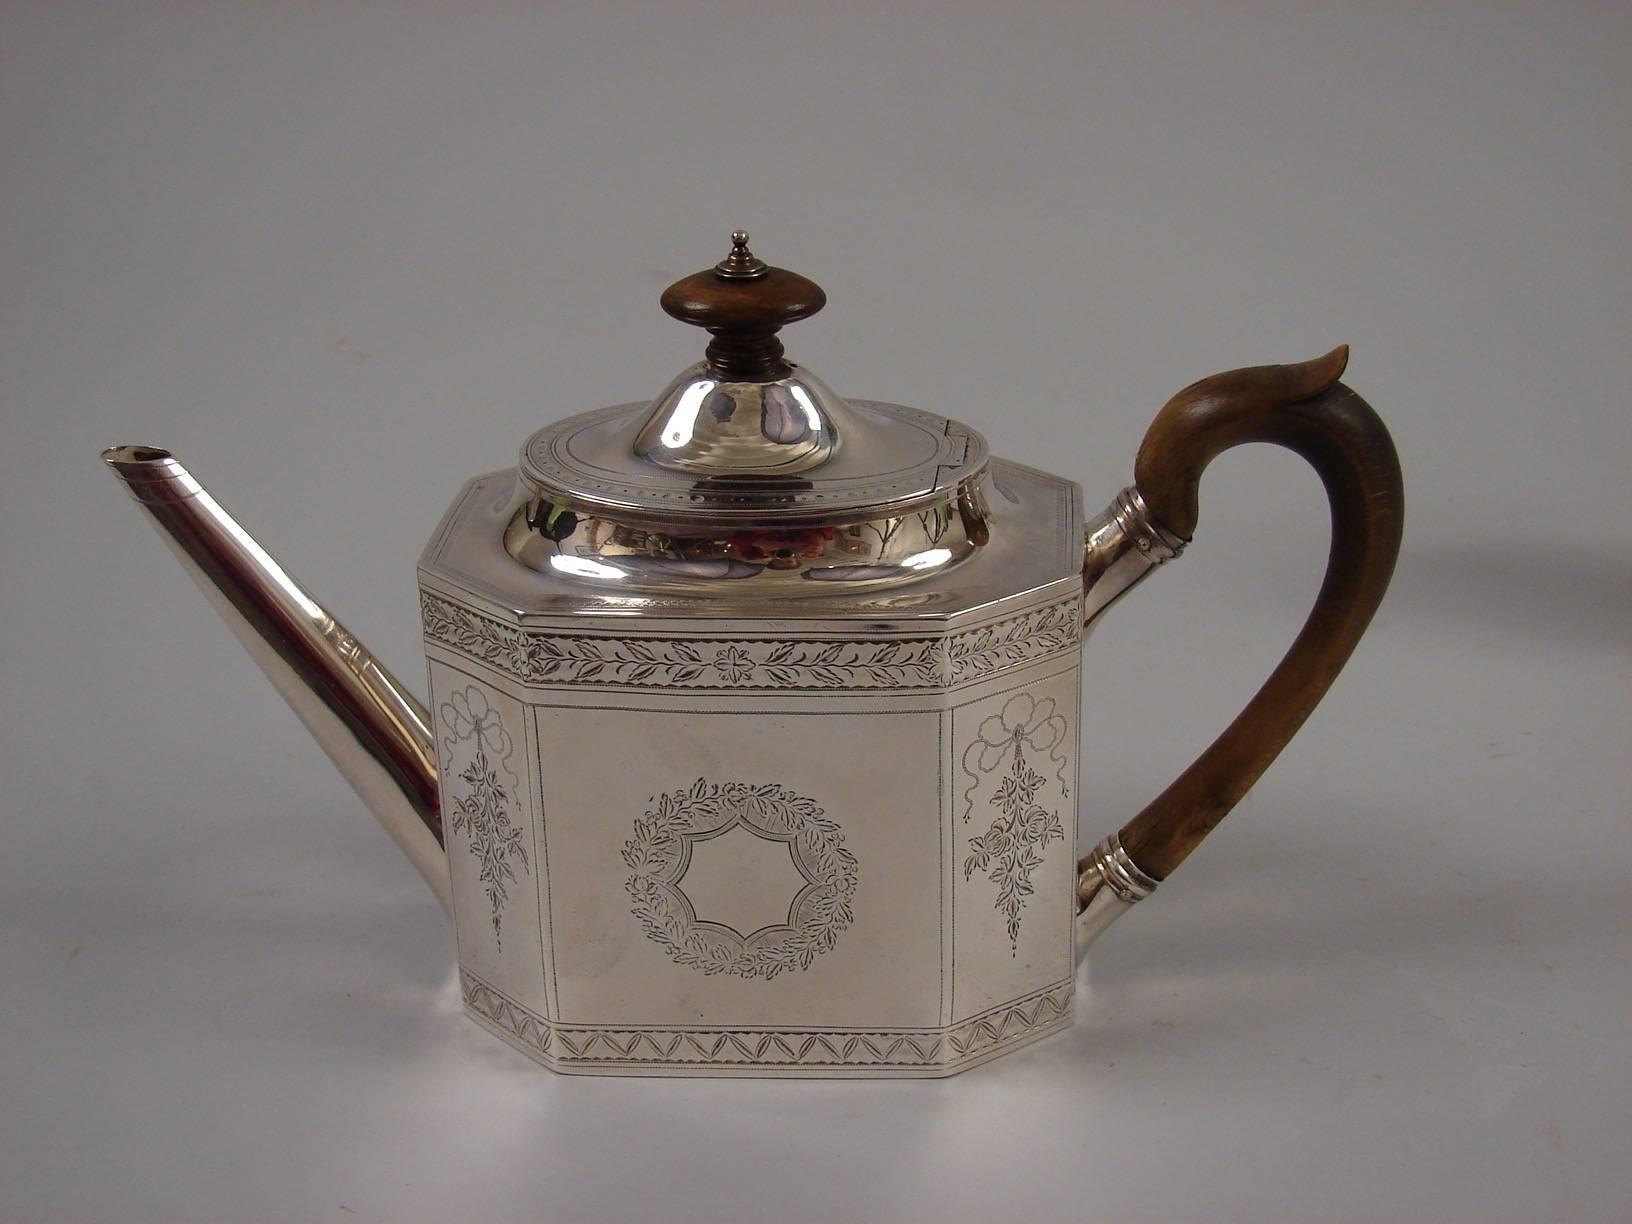 An English George III sterling silver teapot with paneled engraved sides decorated with ribbons and flowers made and hallmarked by Thomas Harper, London 1797, together with an unmarked sterling creamer probably by the same maker. Total silver weight